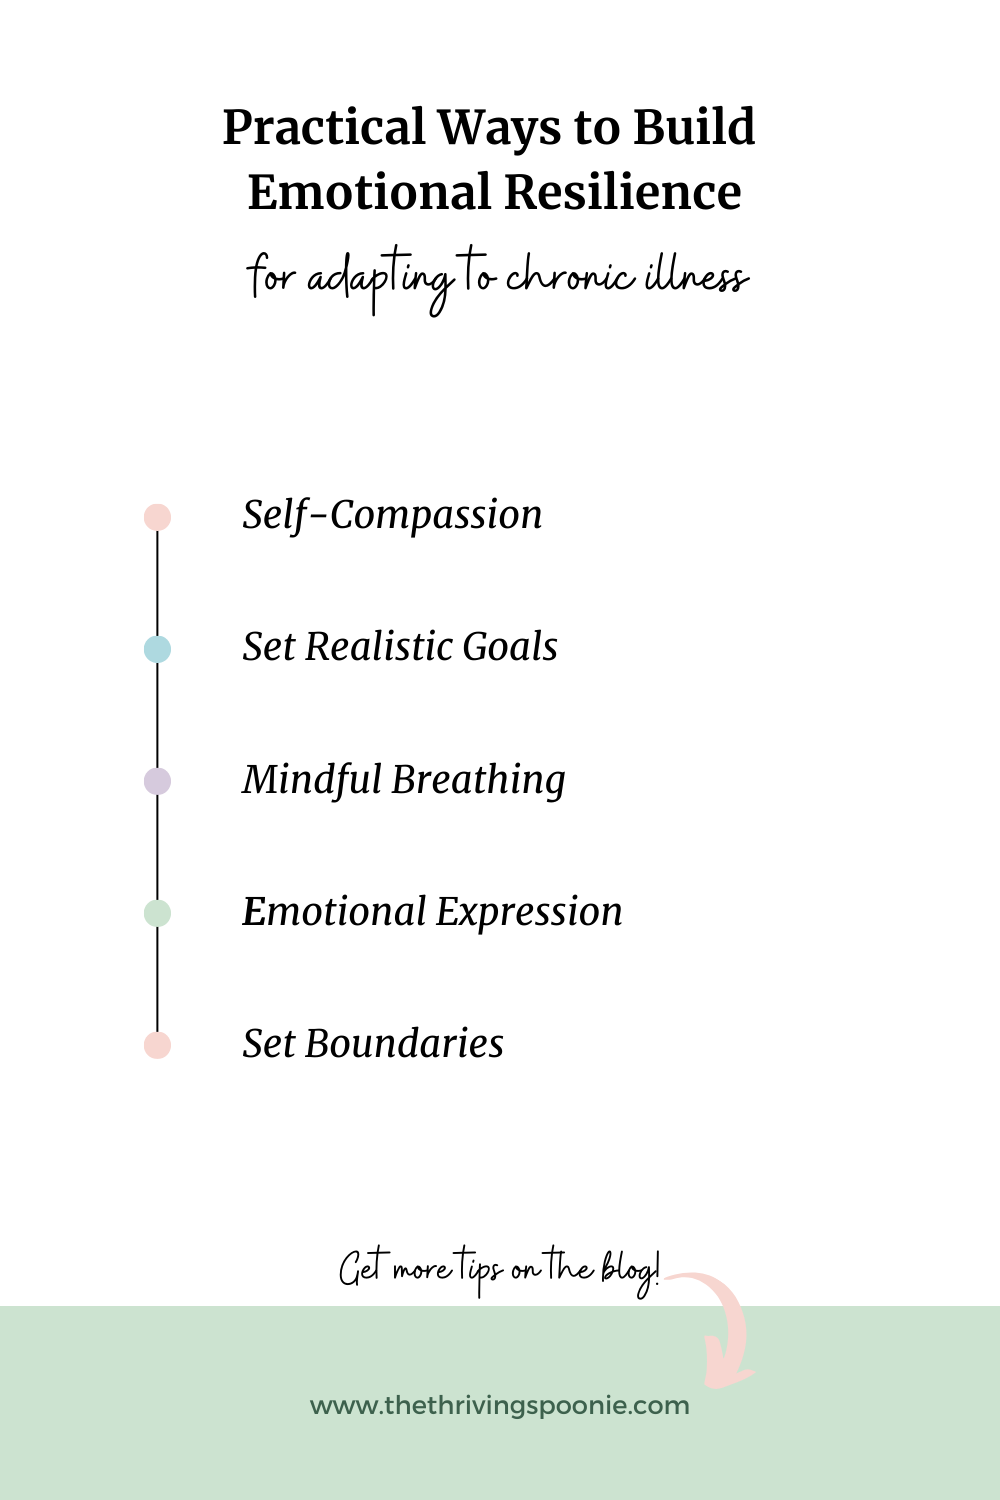 Discover the power of emotional resilience and learn how to adapt to chronic illness with my latest post. Empower yourself and create a fulfilling life while facing the challenges that come with living with a persistent condition.